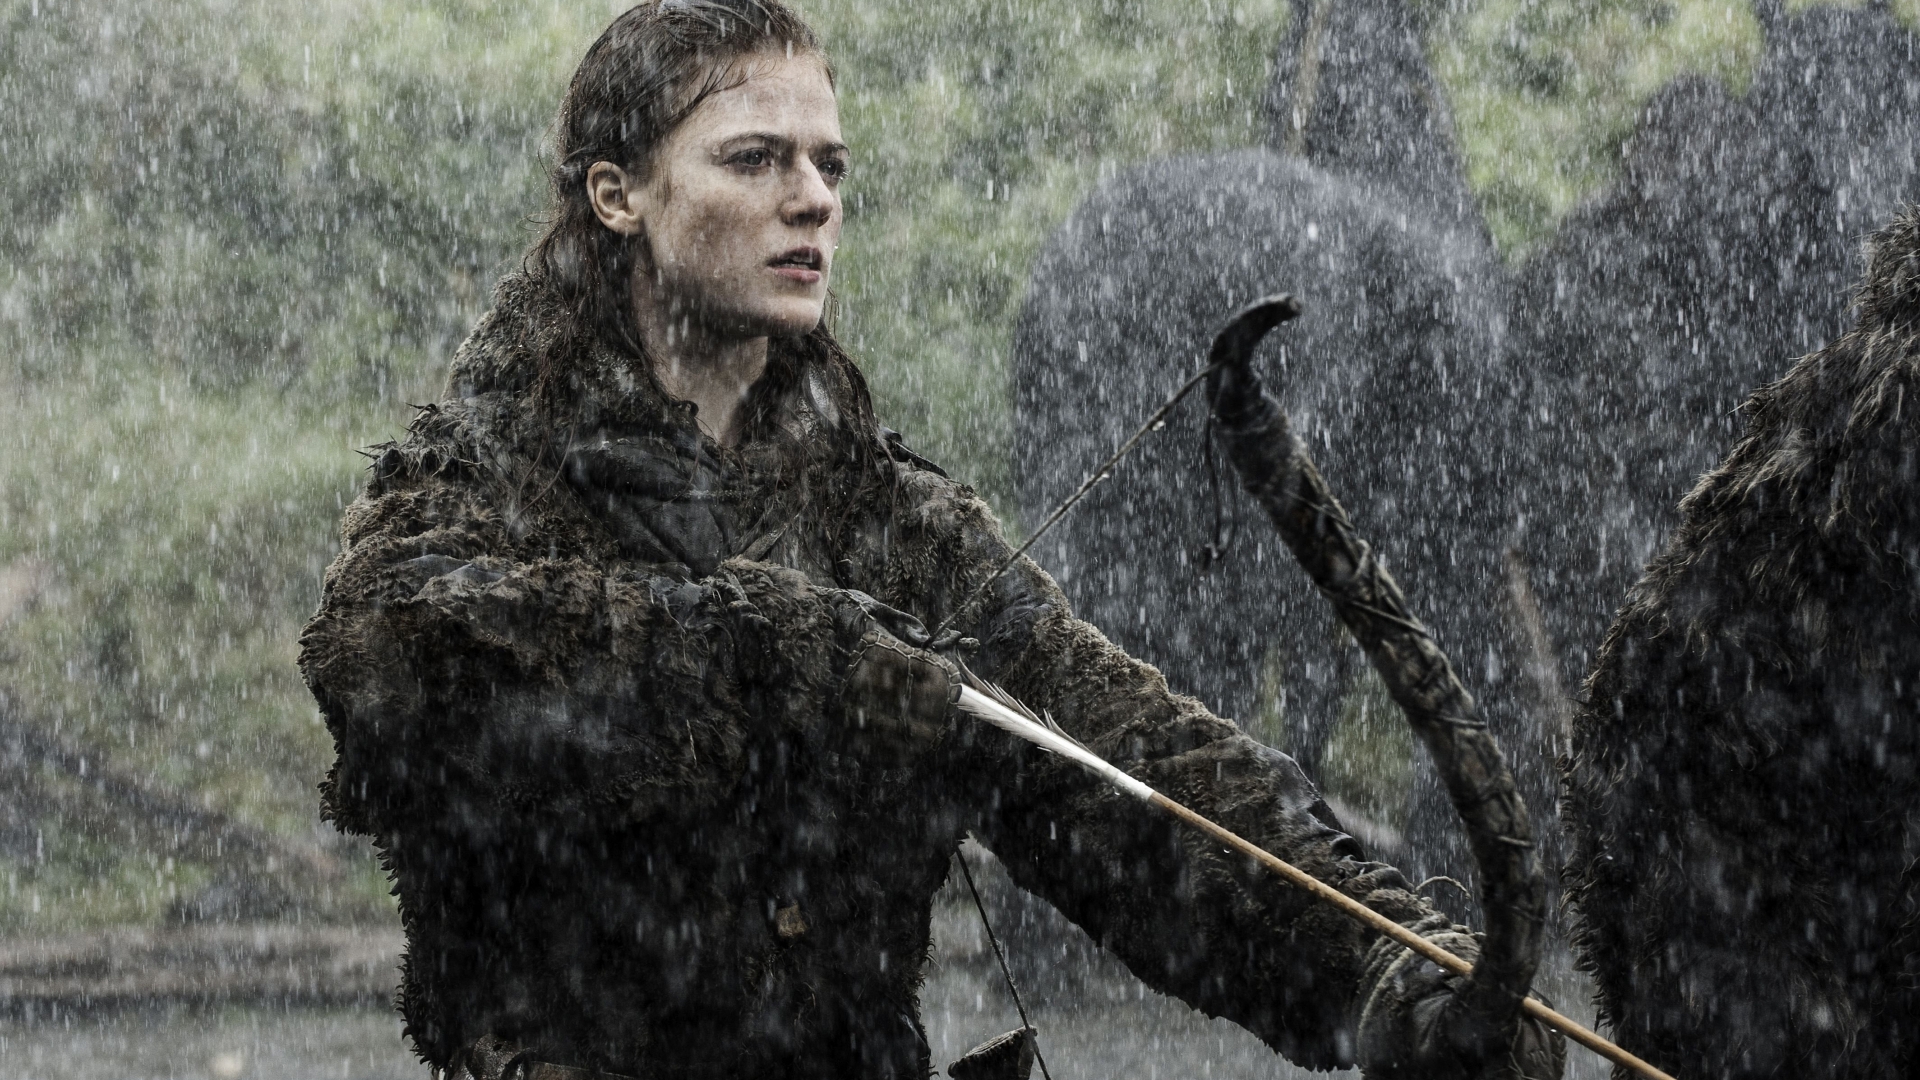 Ygritte from Game of Thrones for 1920 x 1080 HDTV 1080p resolution